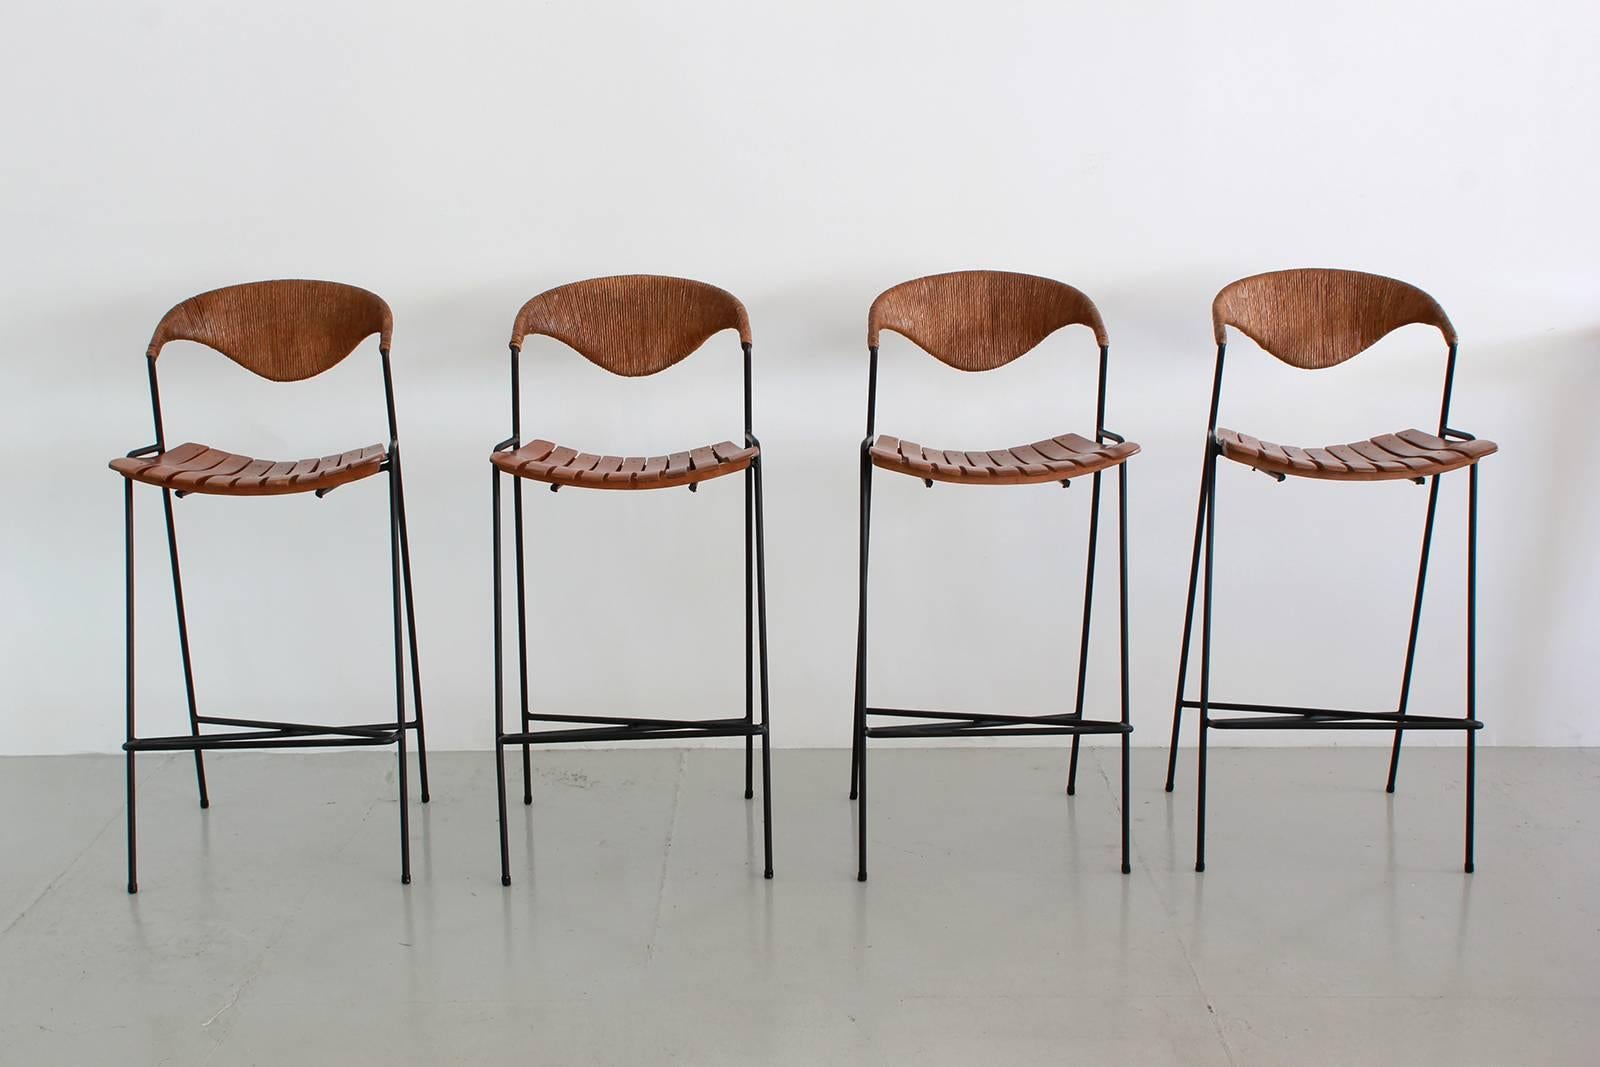 Amazing barstools by Arthur Umanoff for Raymor. Iron bases with rushed back and wood slatted seats.
Excellent vintage condition.
Priced individually. $5600 for set.